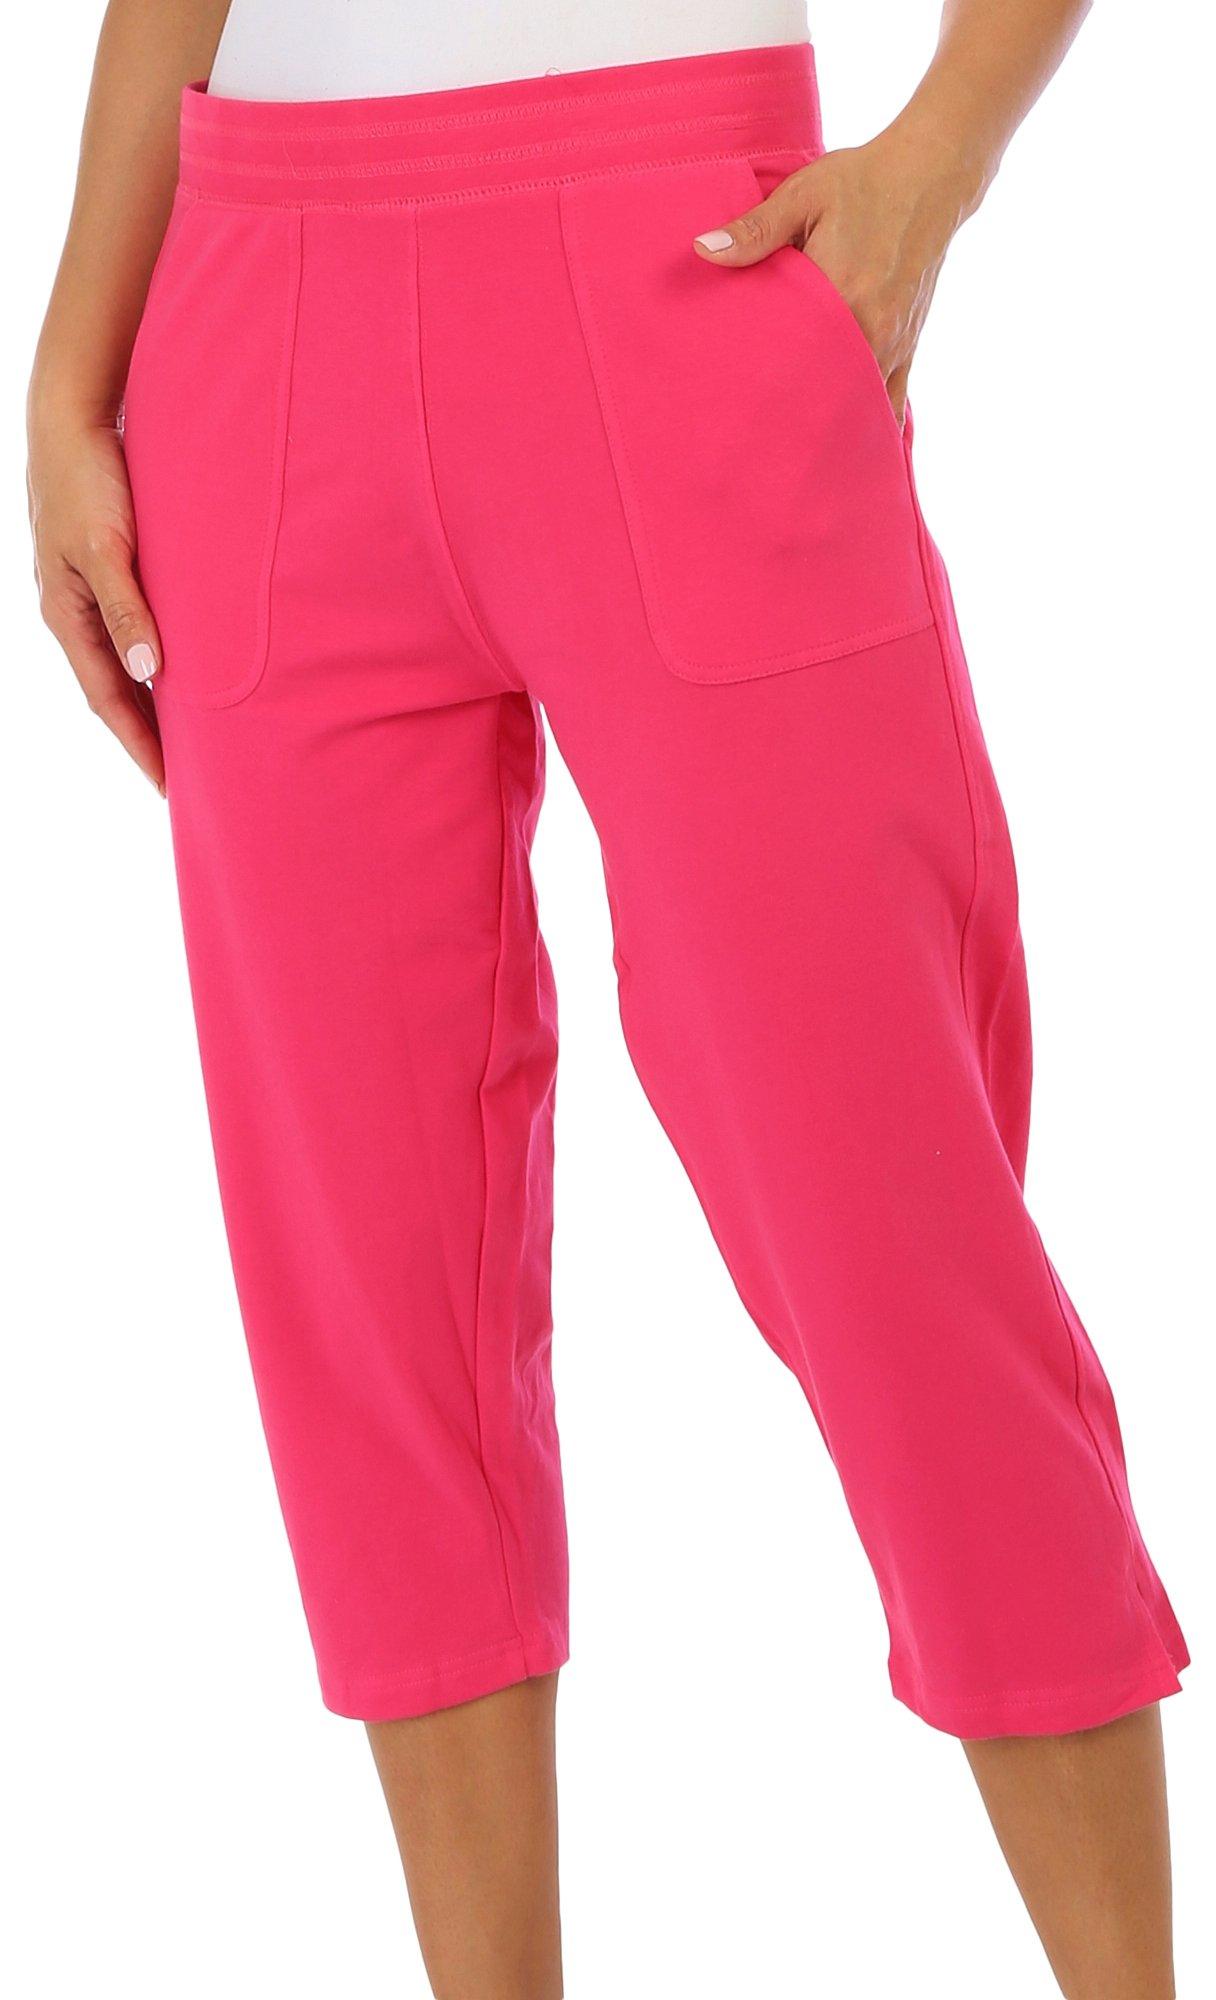 Petite 22in. French Terry  Capris